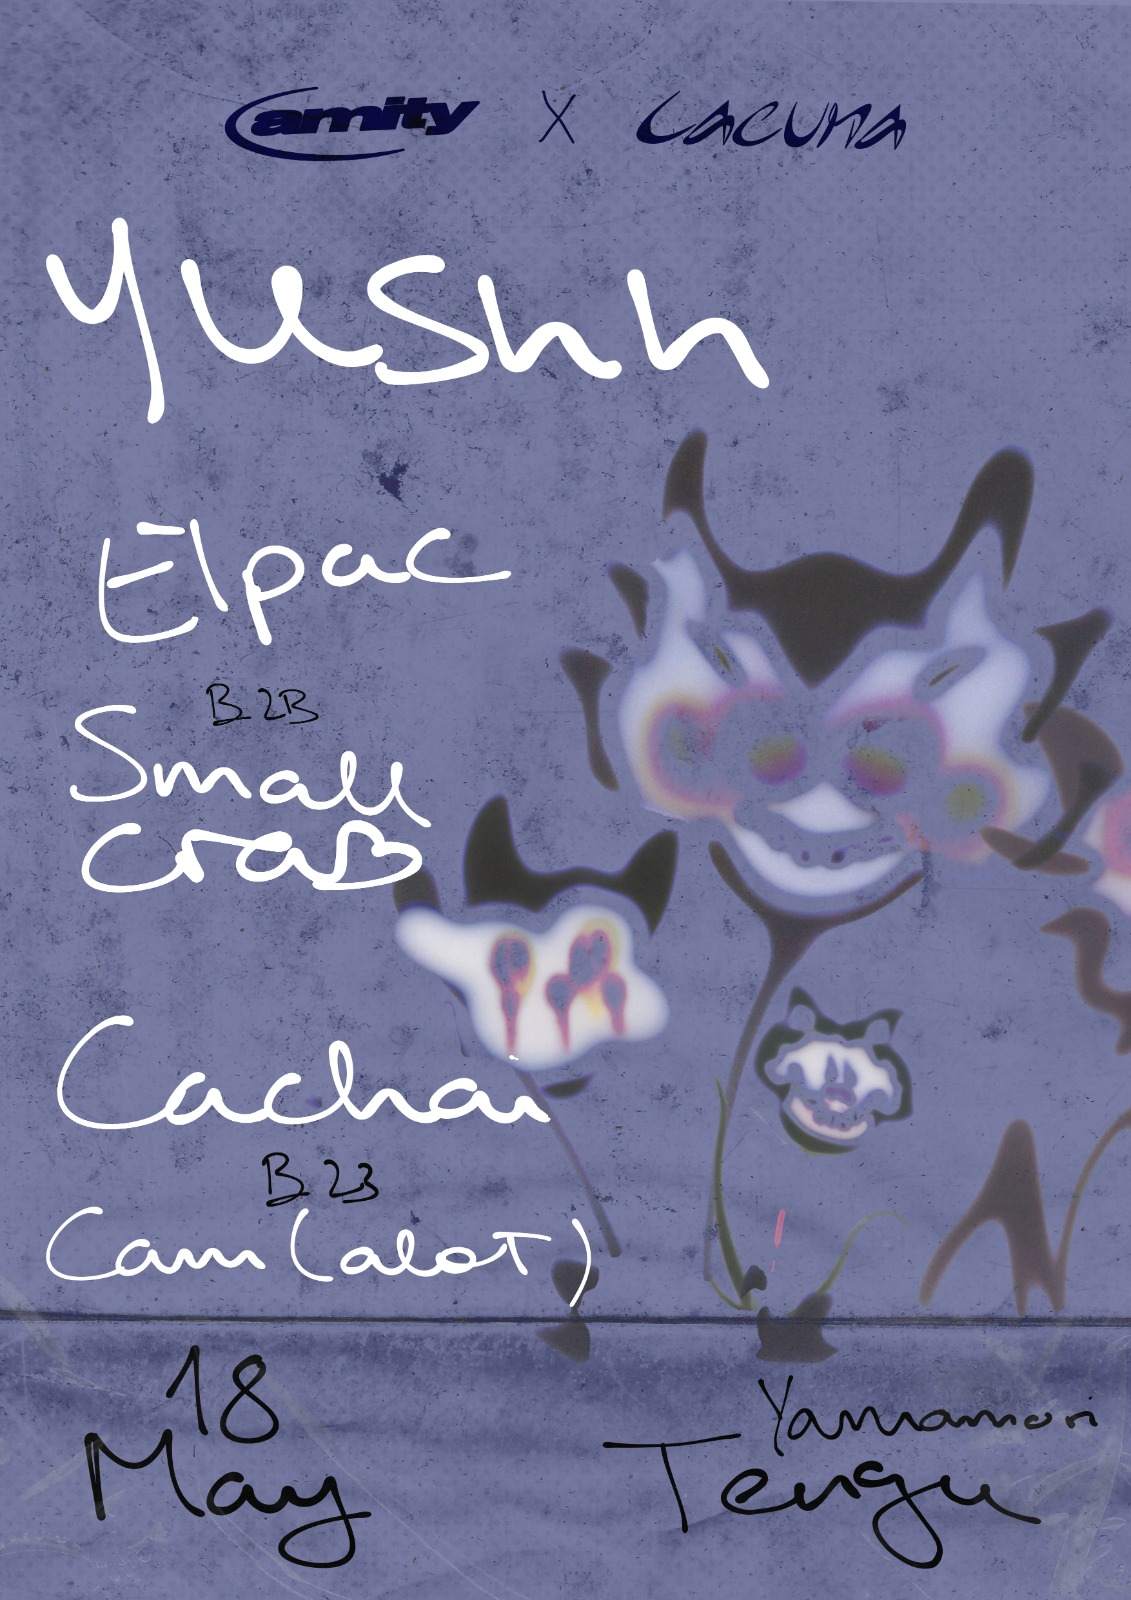 Amity x Lacuna with Yushh - フライヤー表